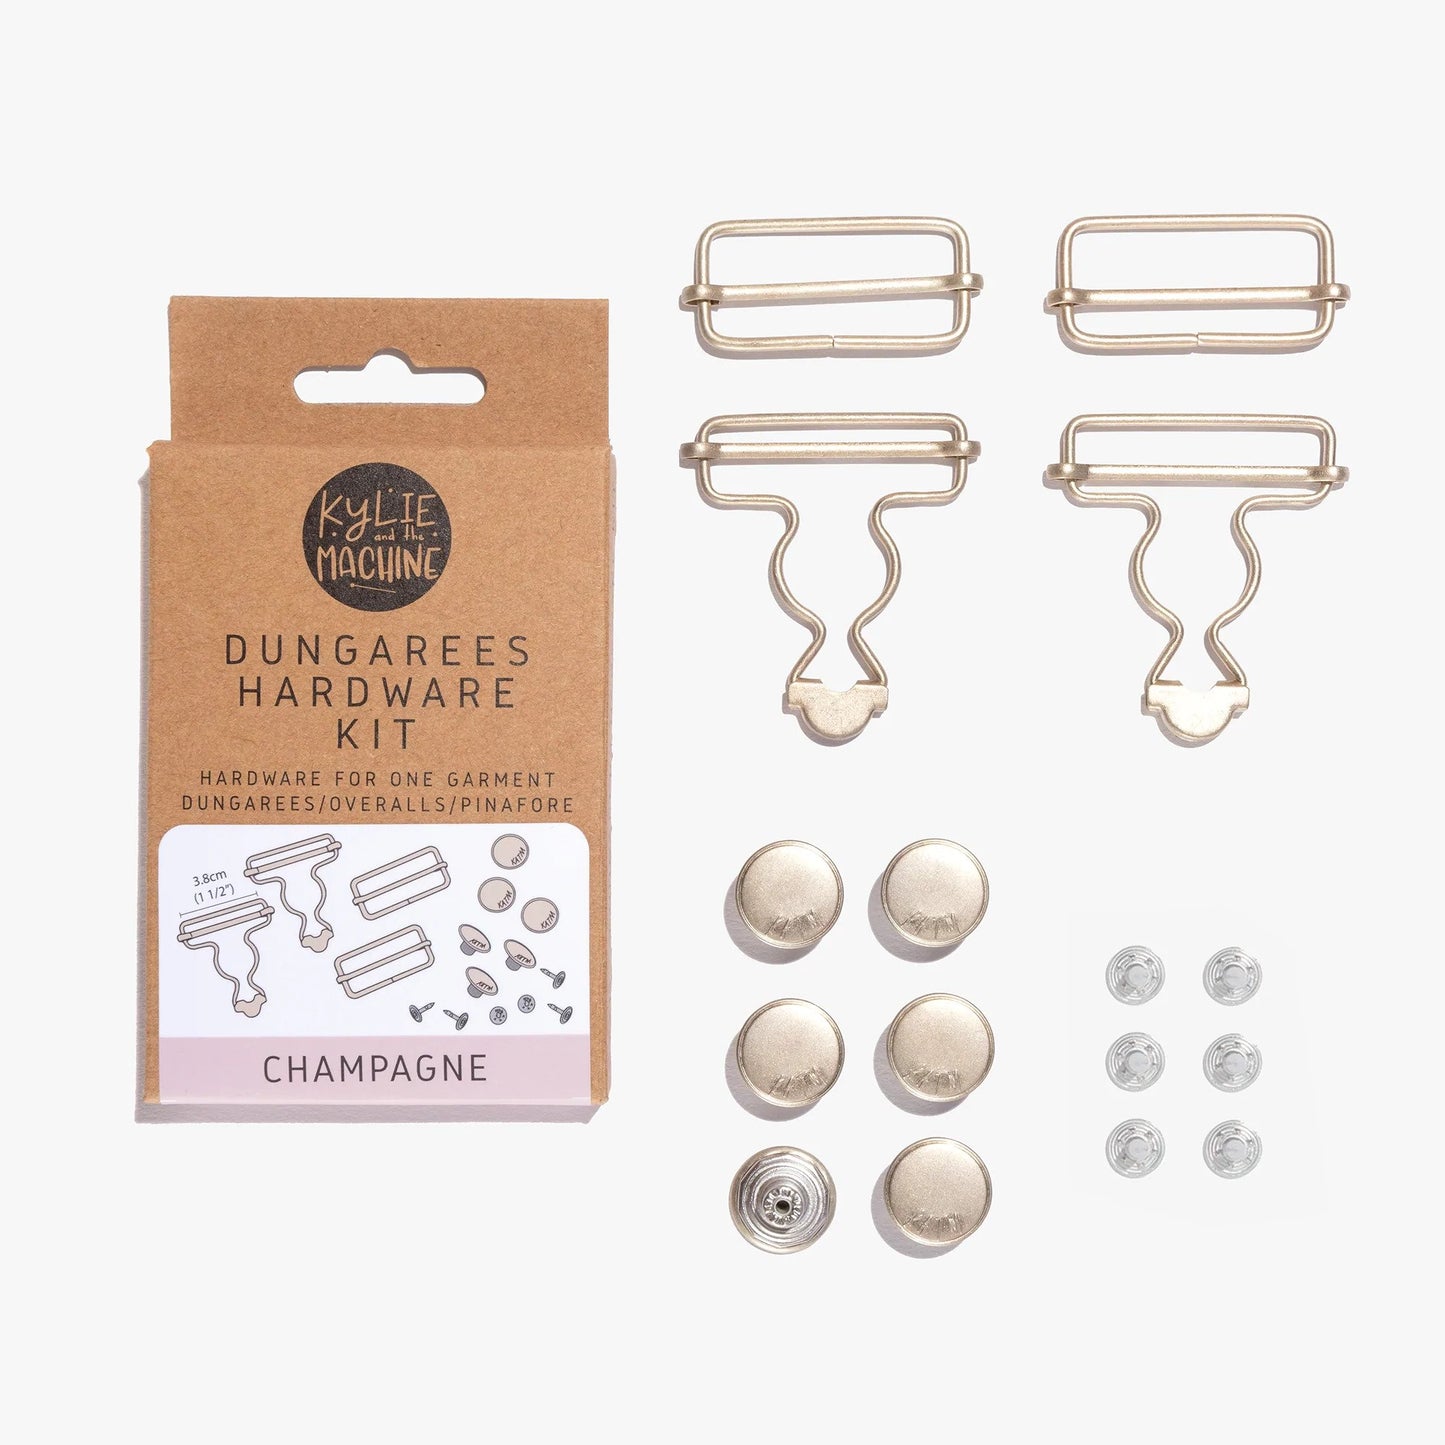 Kylie and the Machine  - Dungarees Hardware Kit